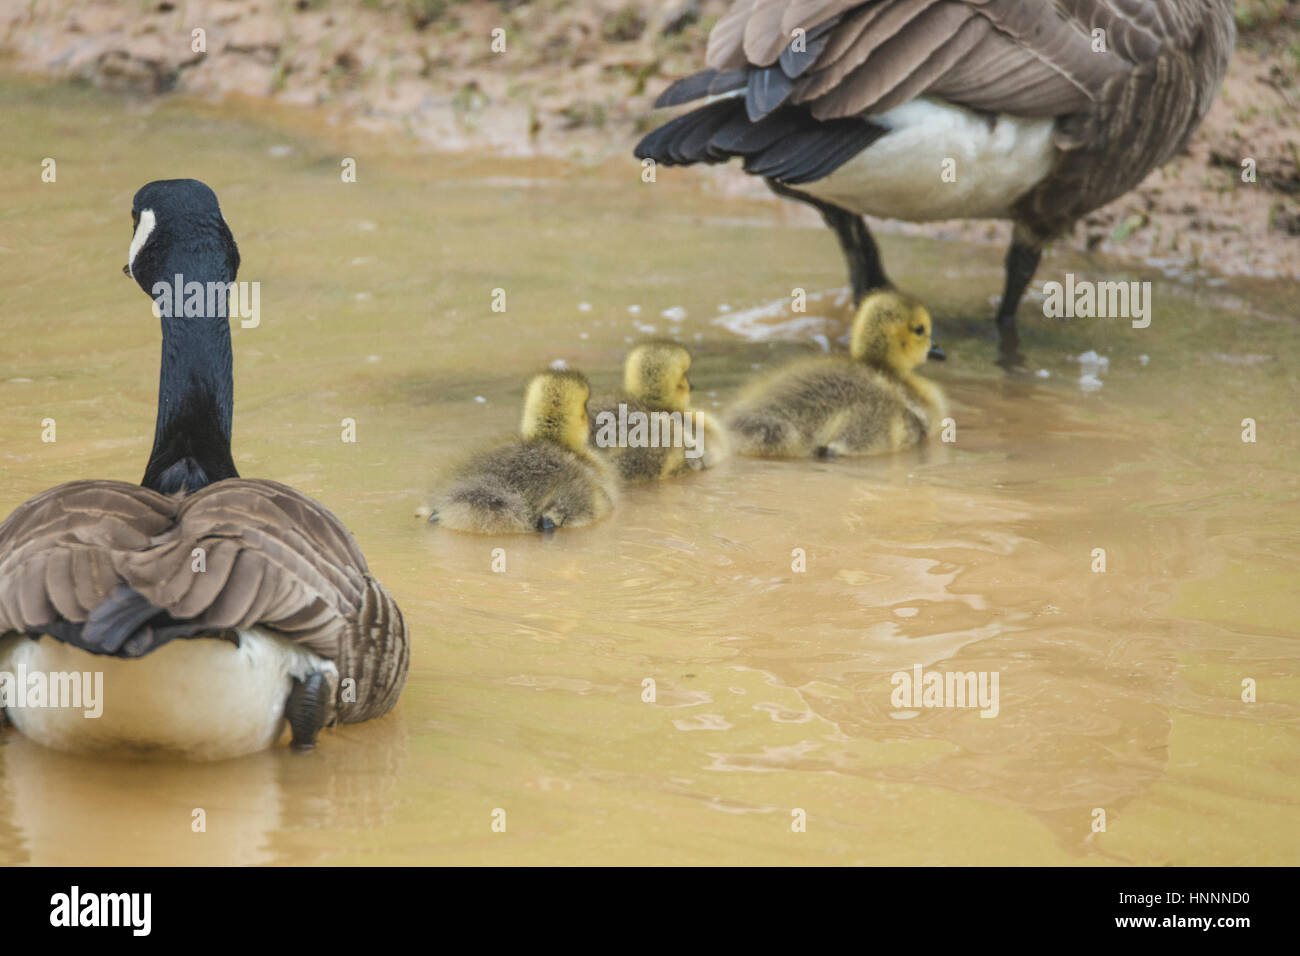 Goslings with goose walking in puddle Stock Photo